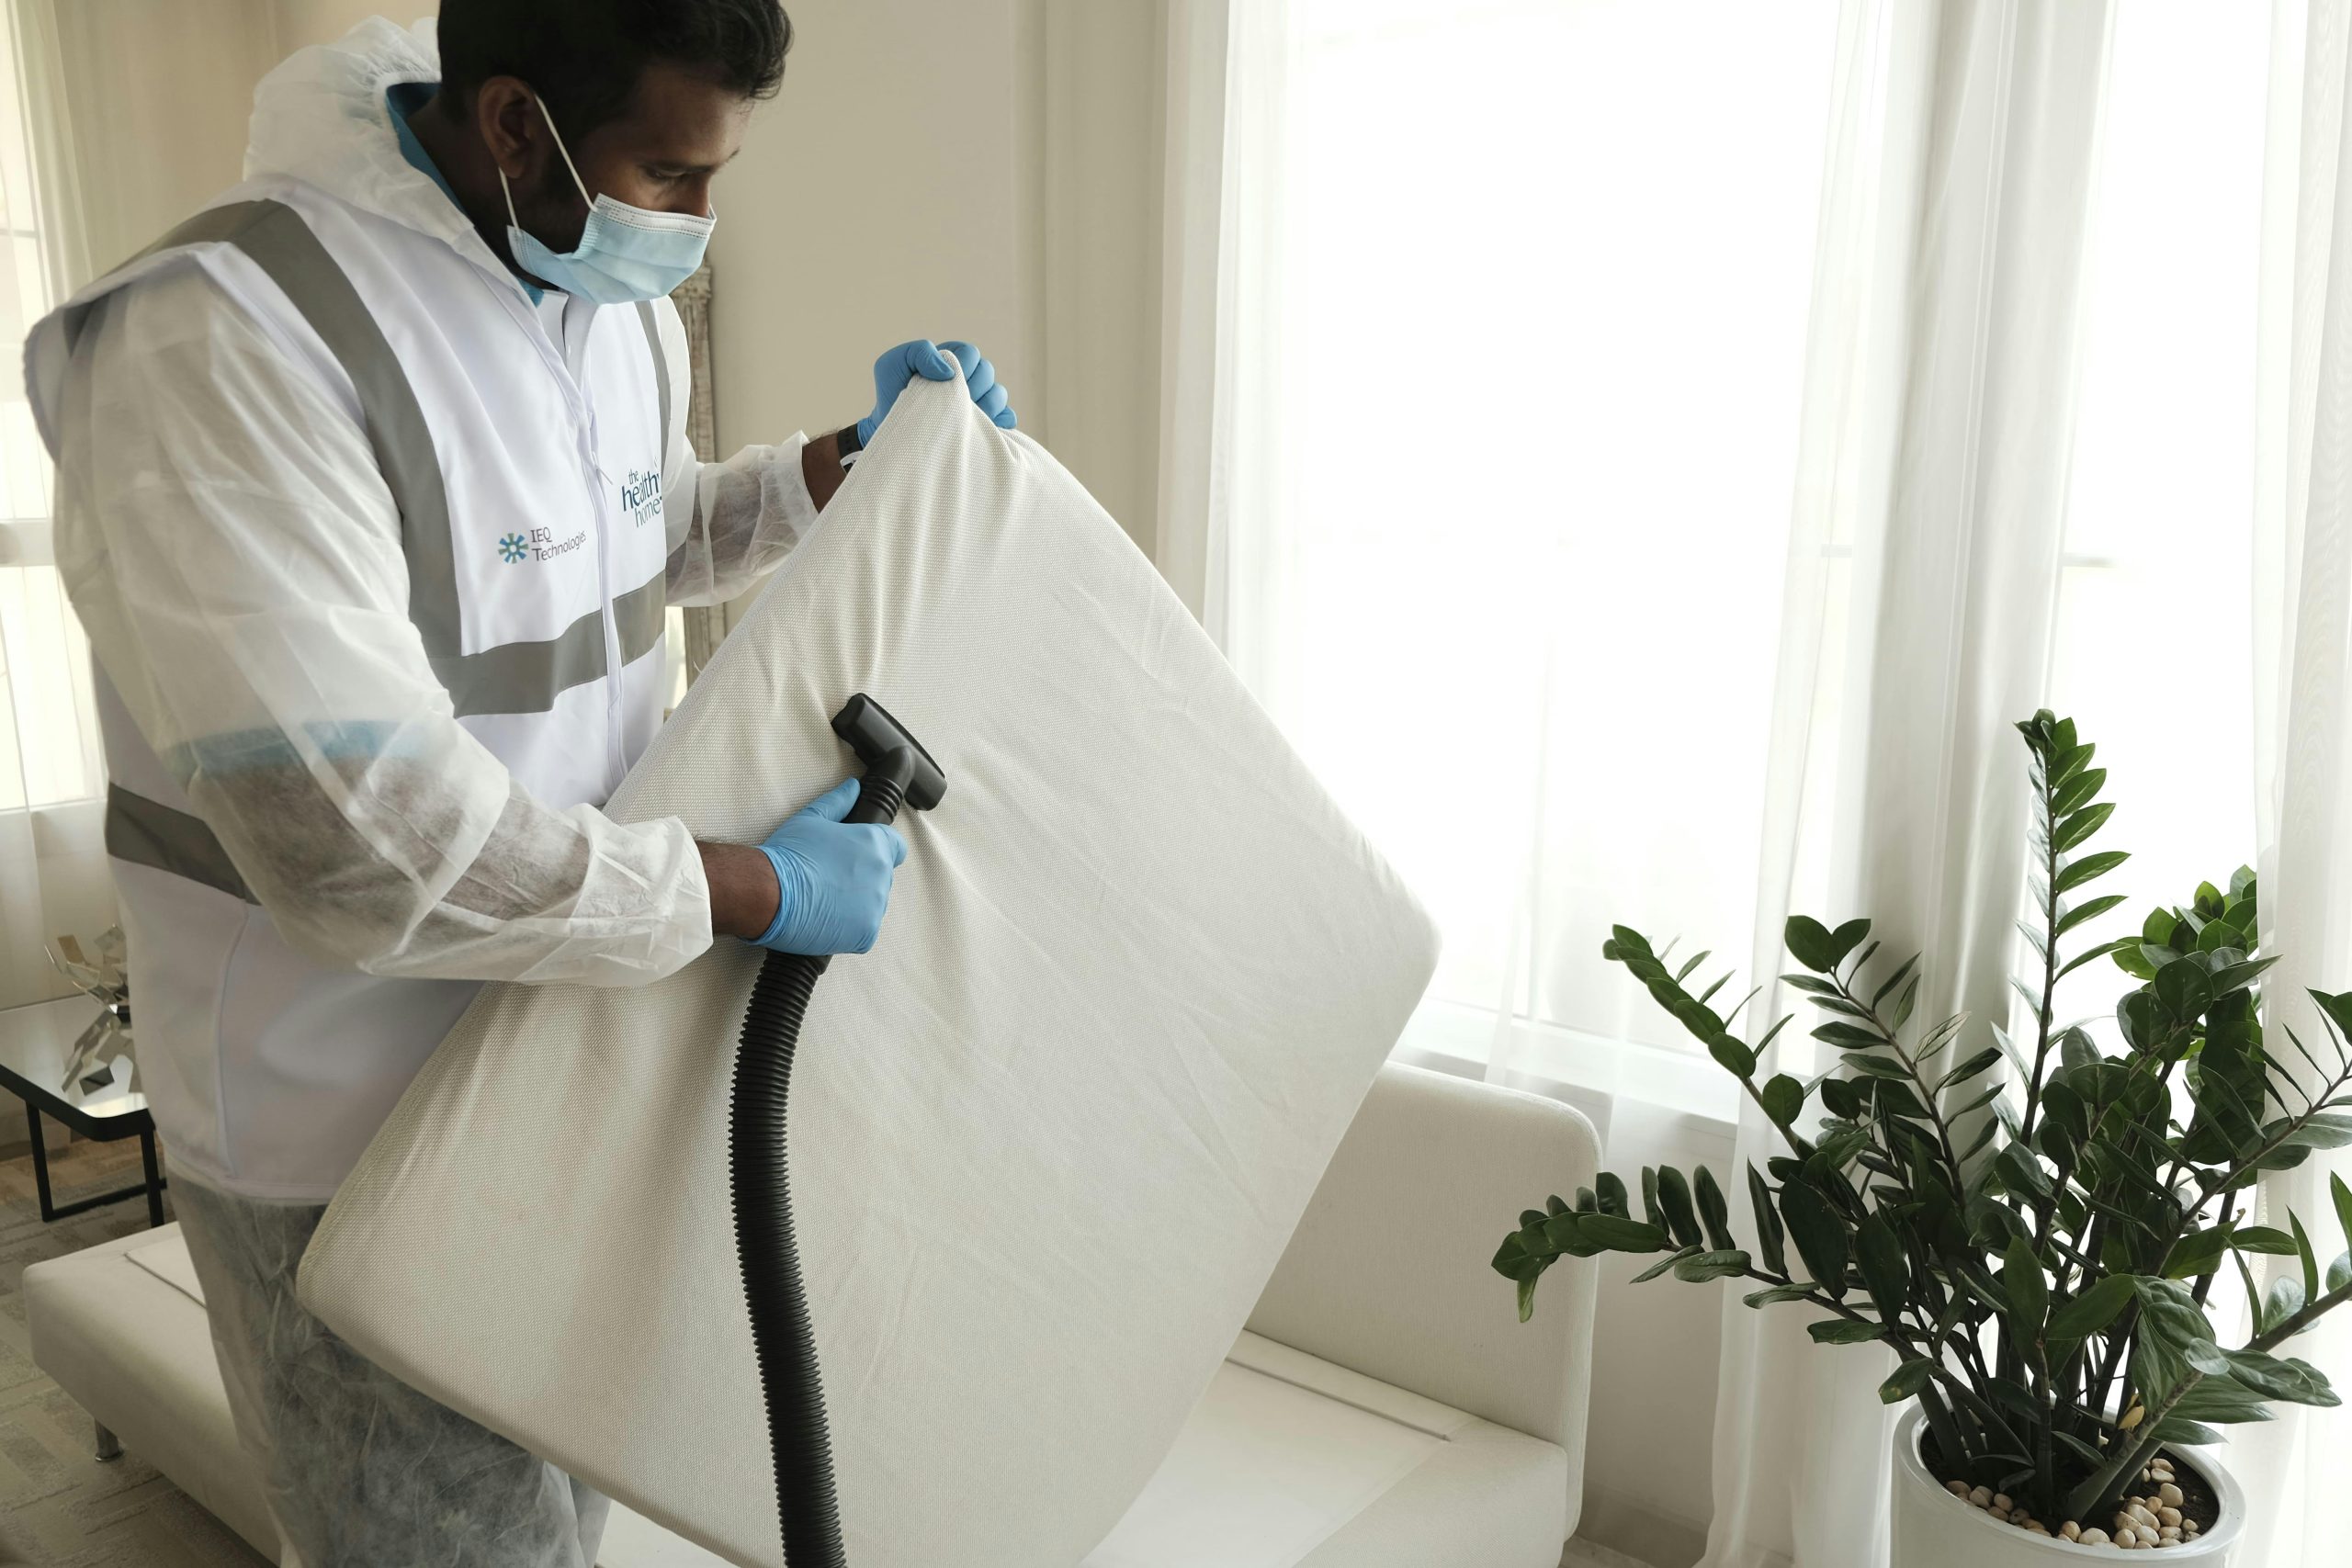 Can A Vacuum Help Get Rid of A Bed Bug Infestation?